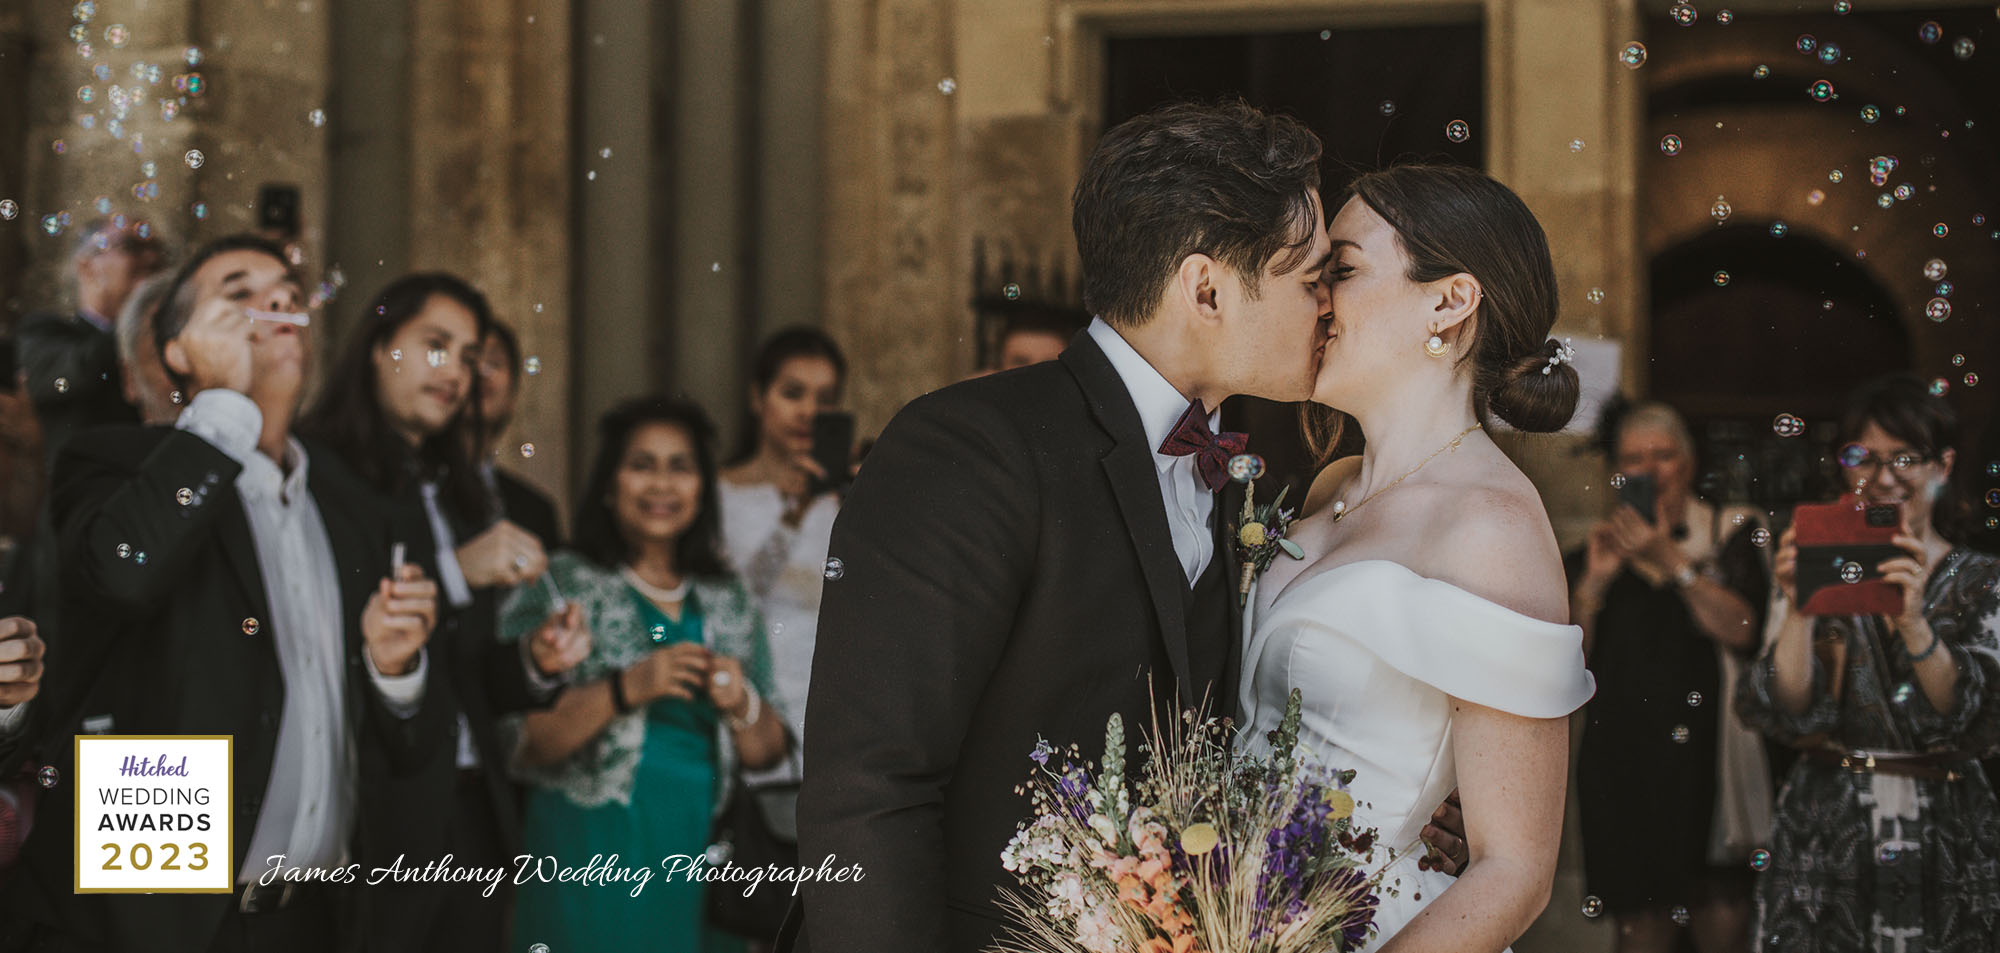 How to Become a Successful Wedding Photographer - james anthony wedding photography